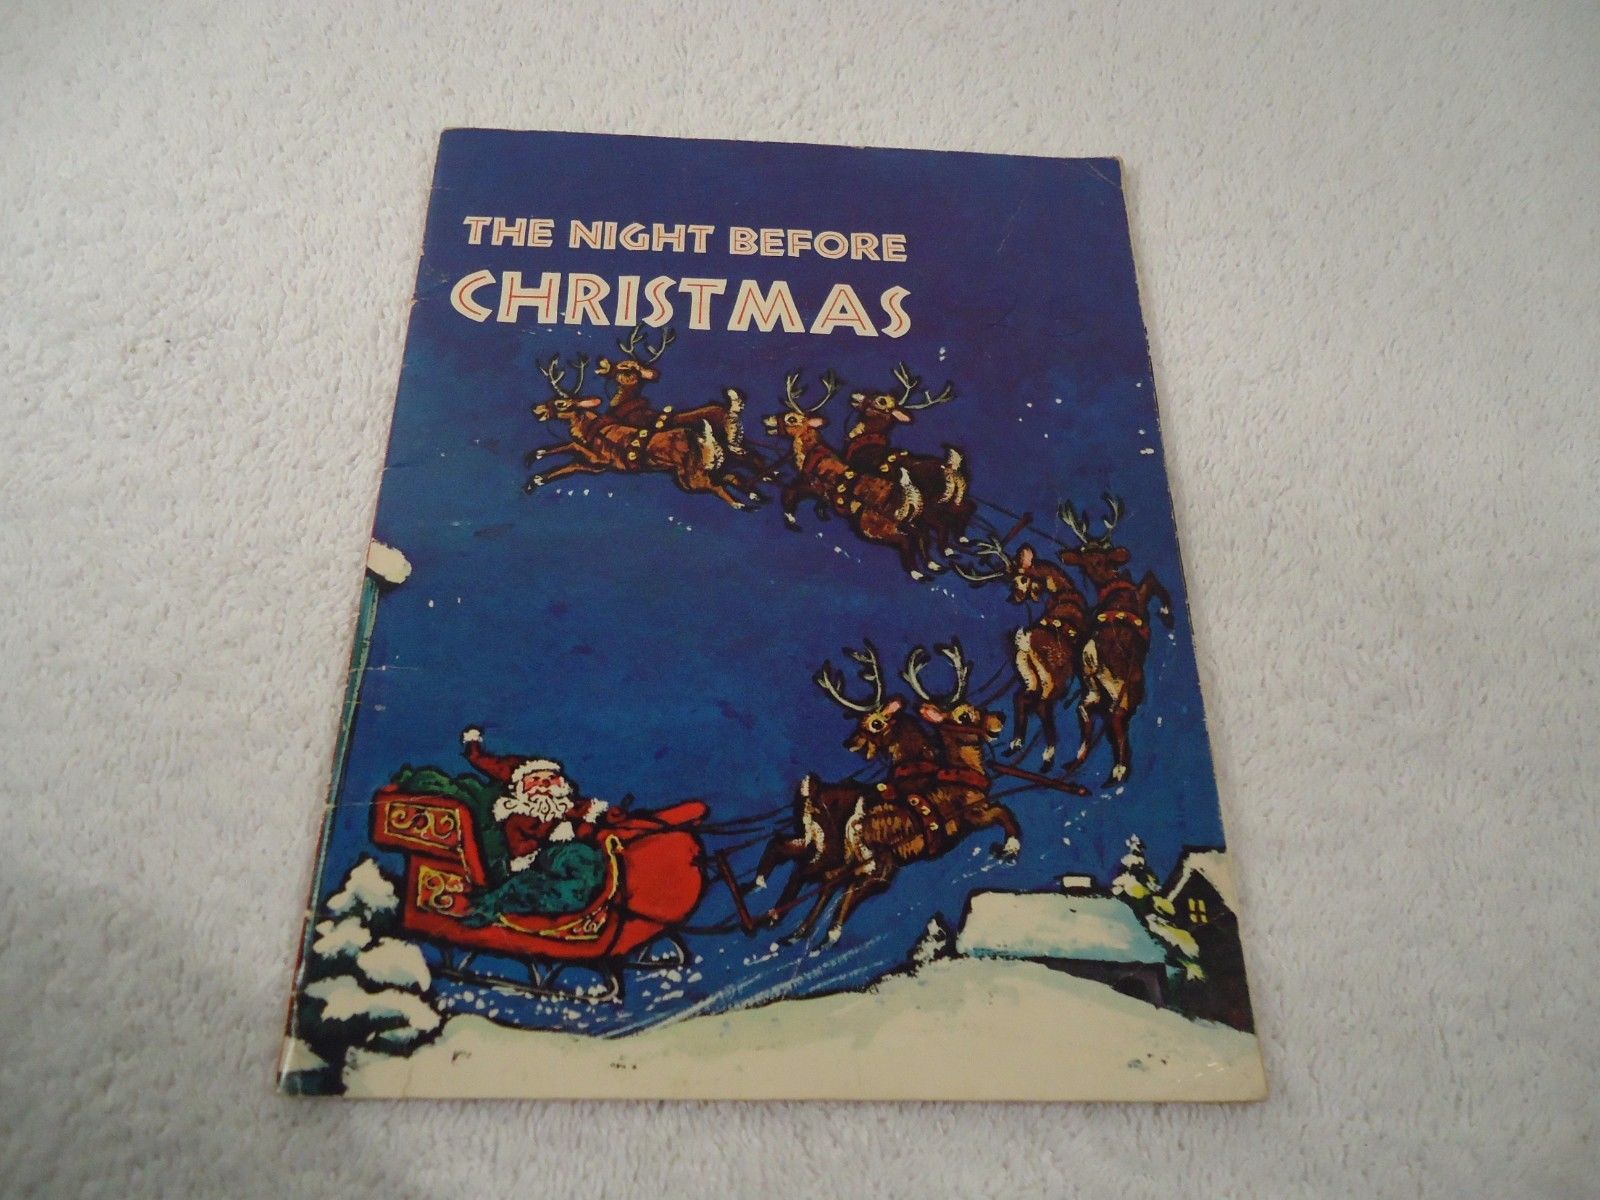 Christmas record and book